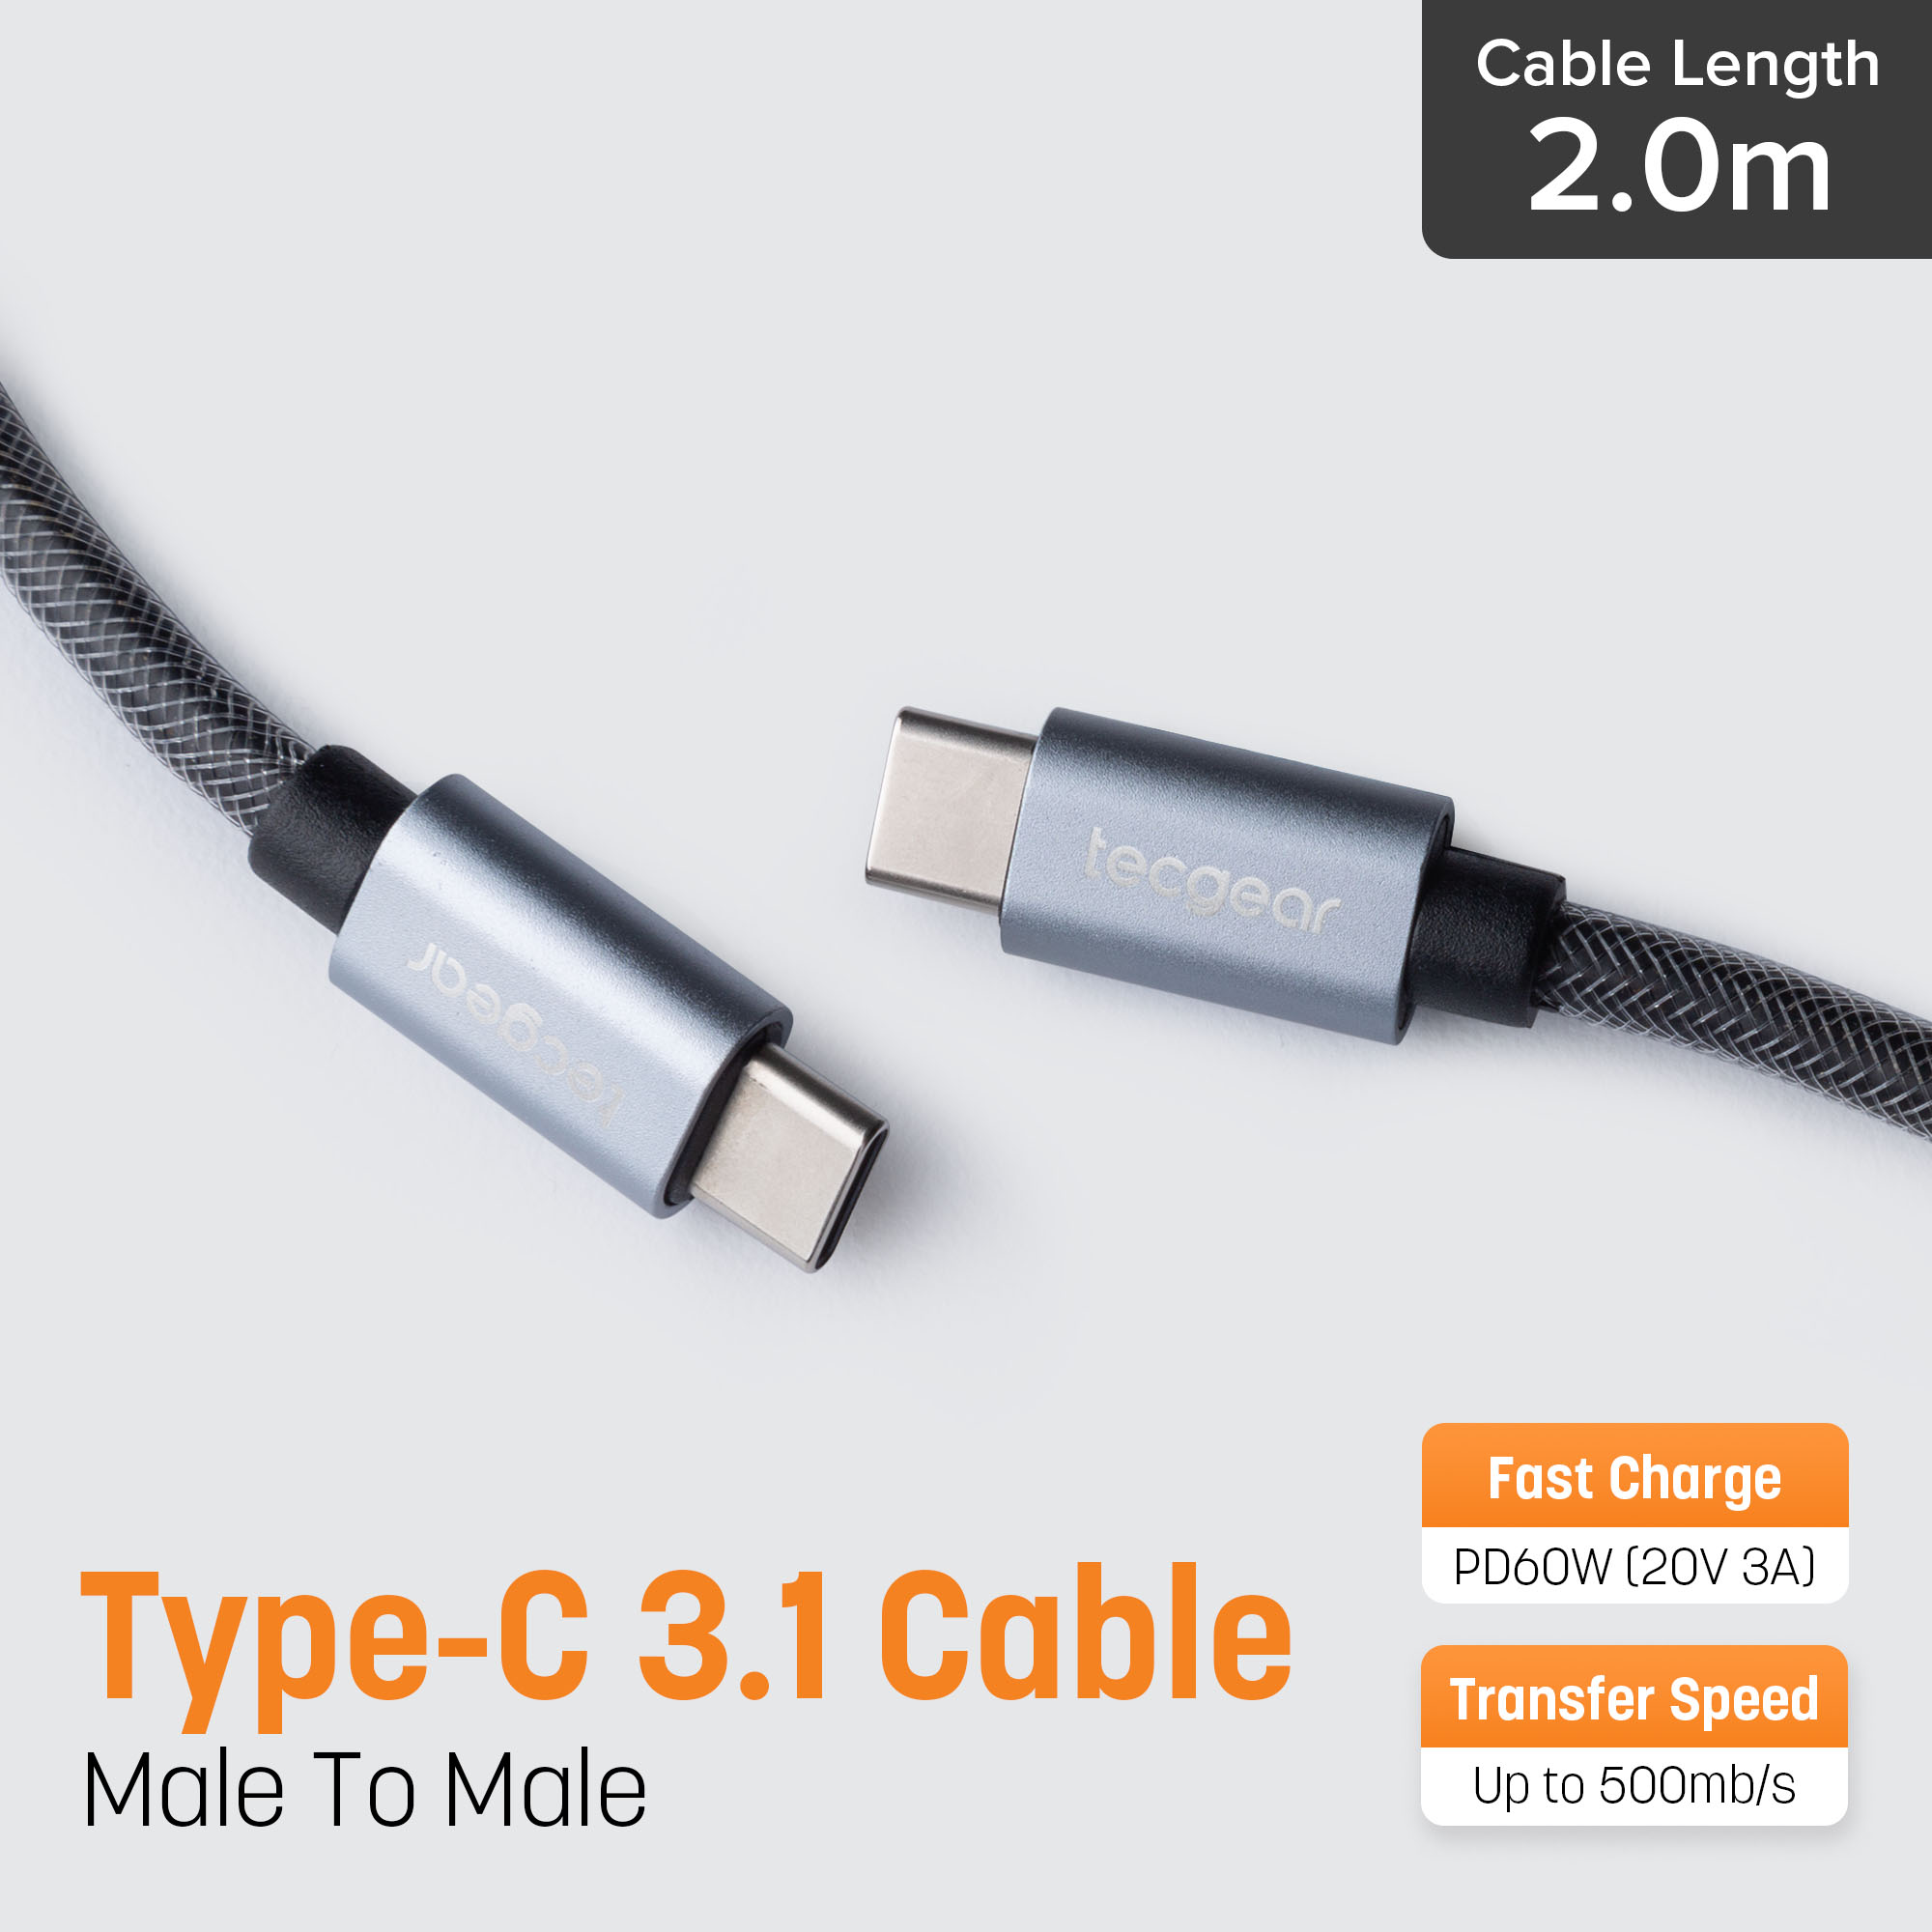 Type-C 3.1 Cable 2.0m